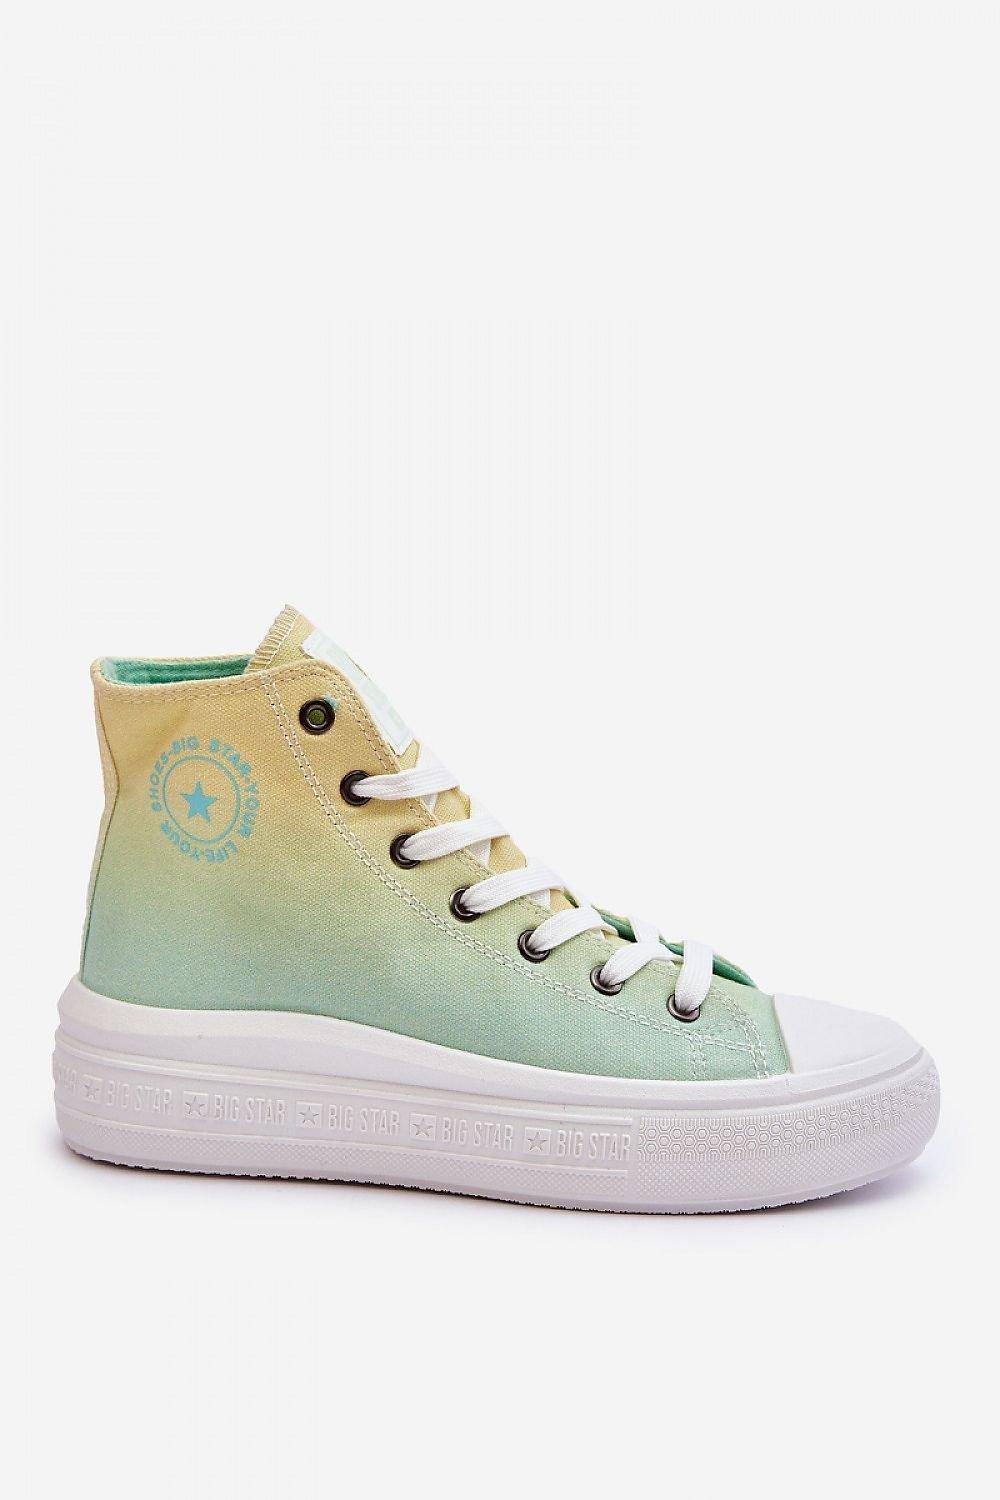 TEEK - Ombre Laced High-Top Platform Sneakers SHOES TEEK MH   